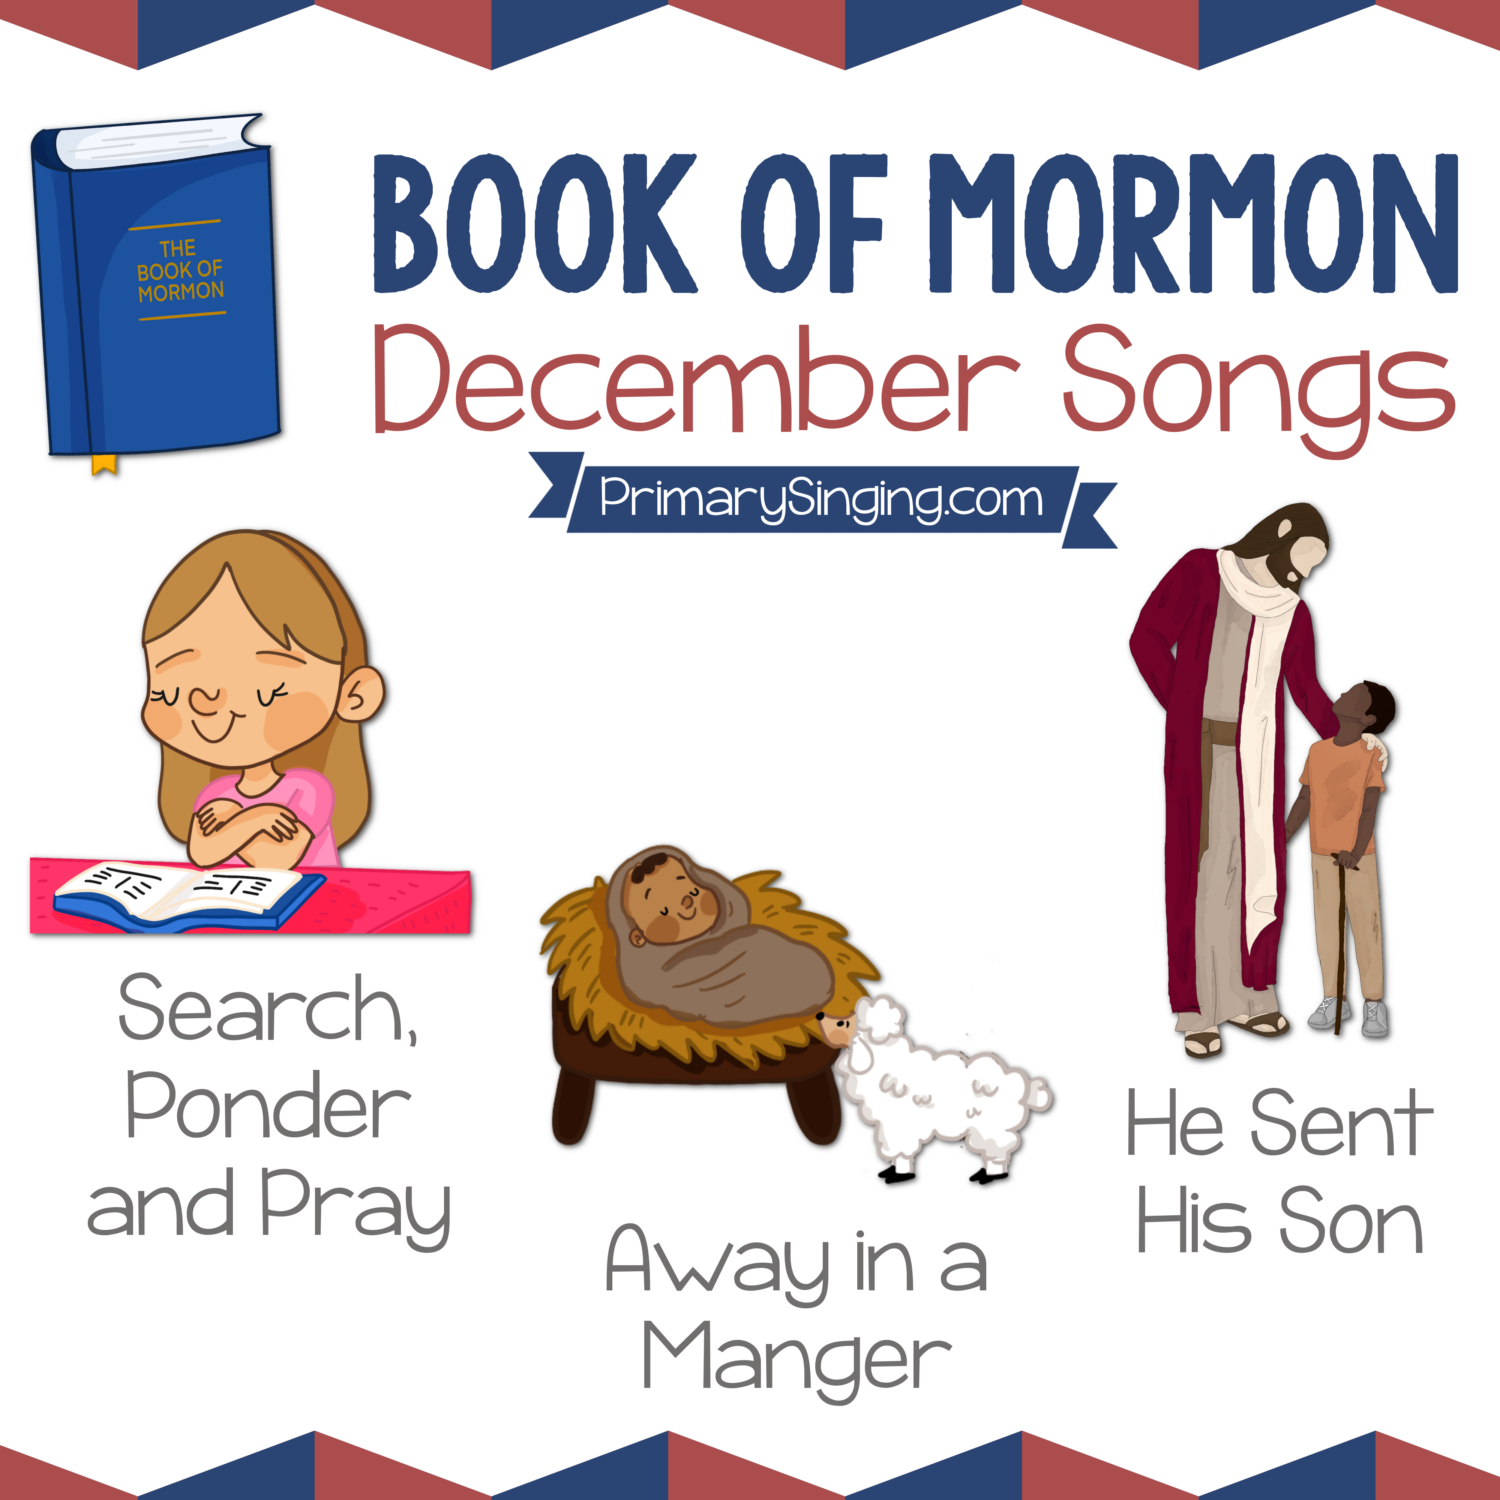 Book of Mormon December Song List - Search Ponder and Pray, Away in a Manger, and He Sent His Son. Teach these 3 great Primary songs during Singing Time or home Come Follow Me lessons.